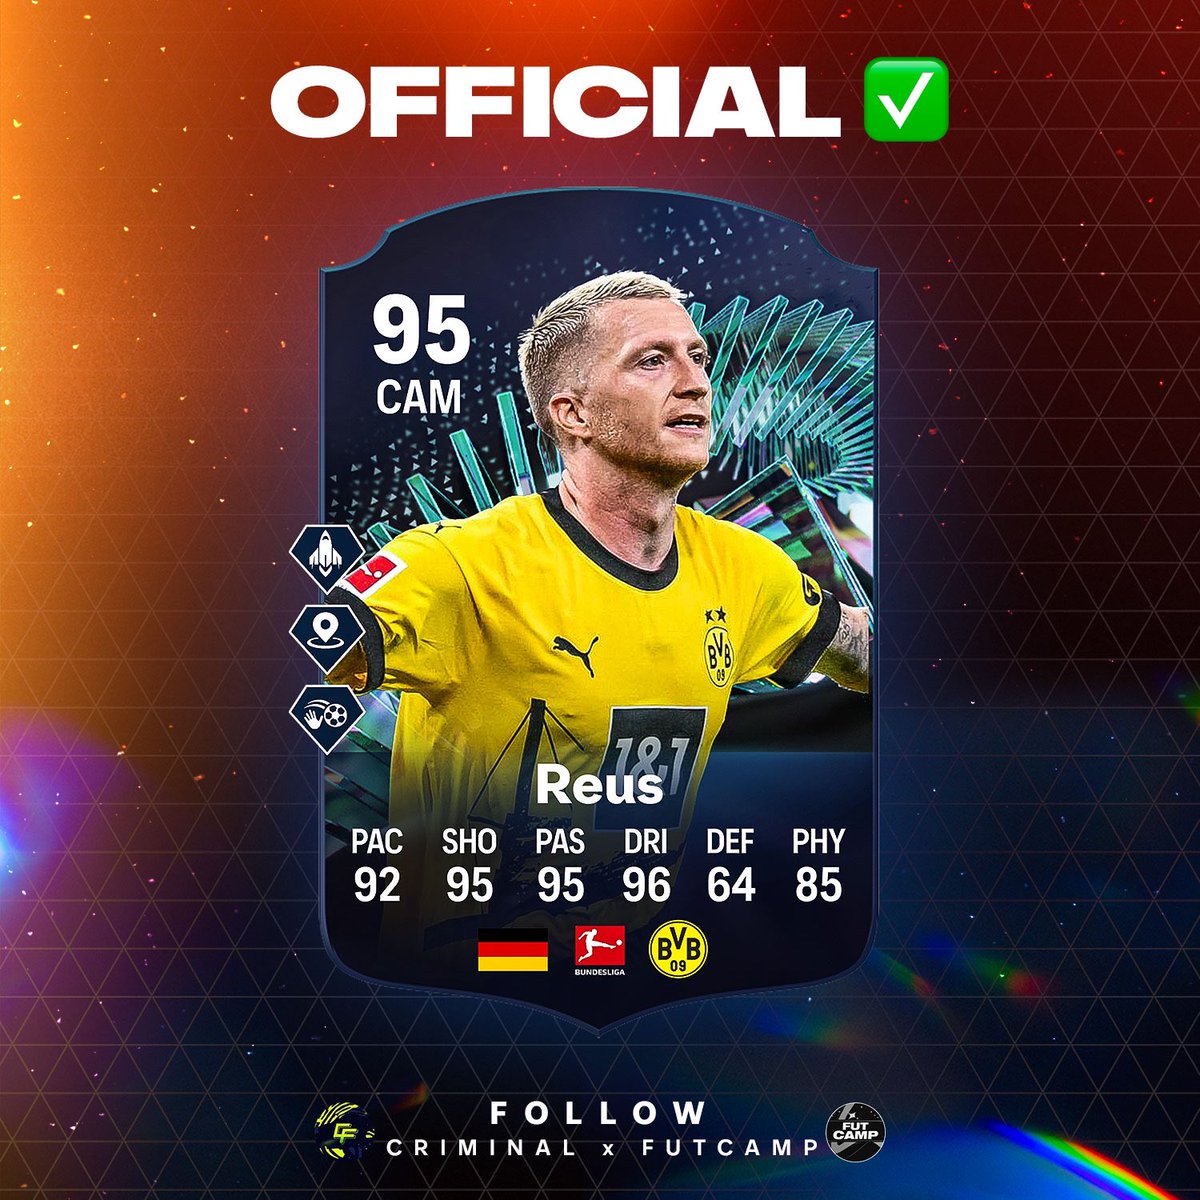 REUS TOTS MOMENTS OFFICIAL CARD 🌟 He just announced his departure from @BlackYellow 💔 Stats ✅ PS+ ✅ Dynamic ✅ Need an EOAE card for sure, right? Collab with @Criminal__x 🎨 Make sure to follow @fut_camp for more leaks 🔔